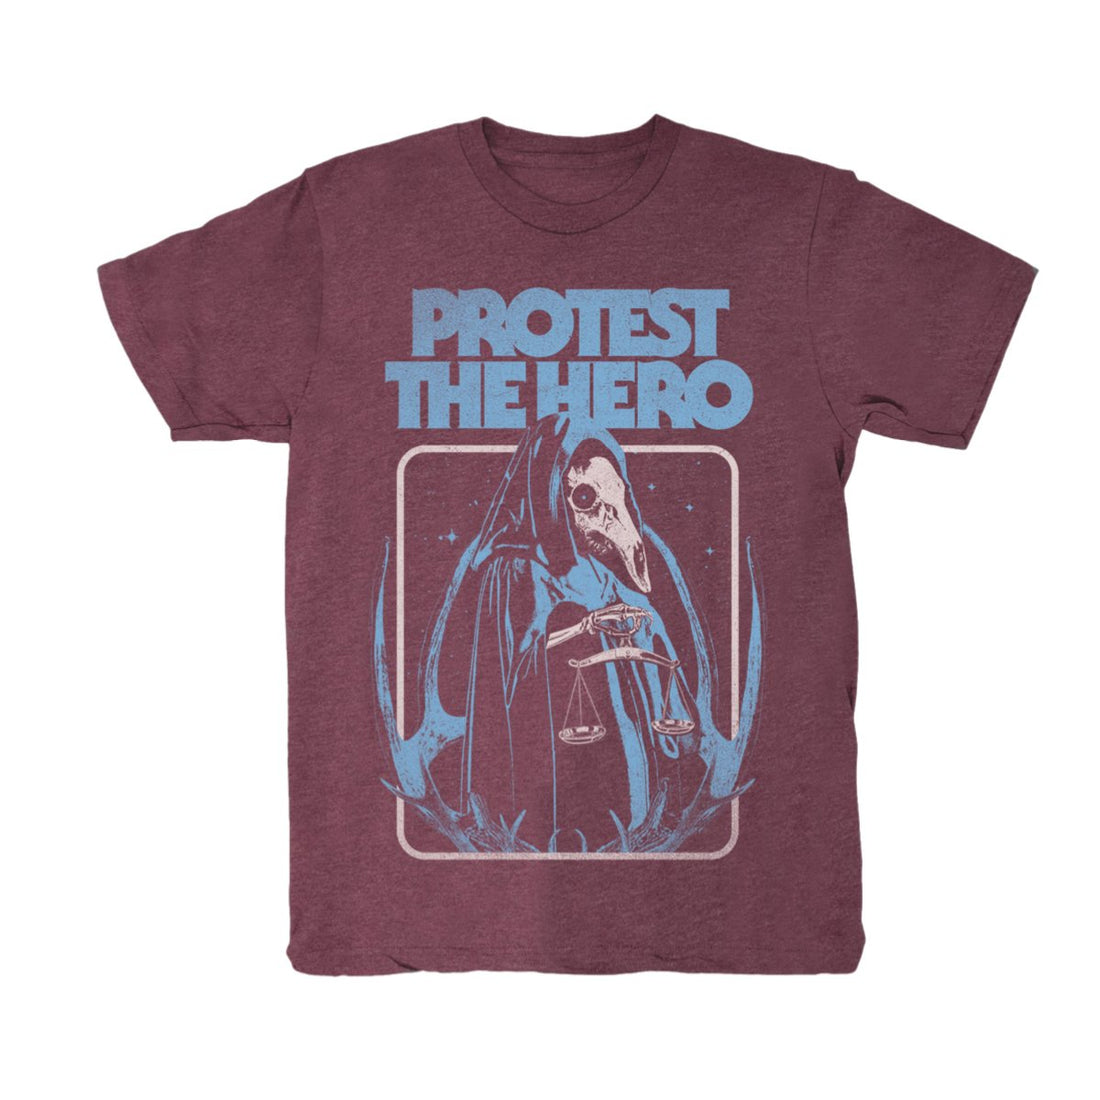 PROTEST THE HERO - Justice - Heather Red Tee